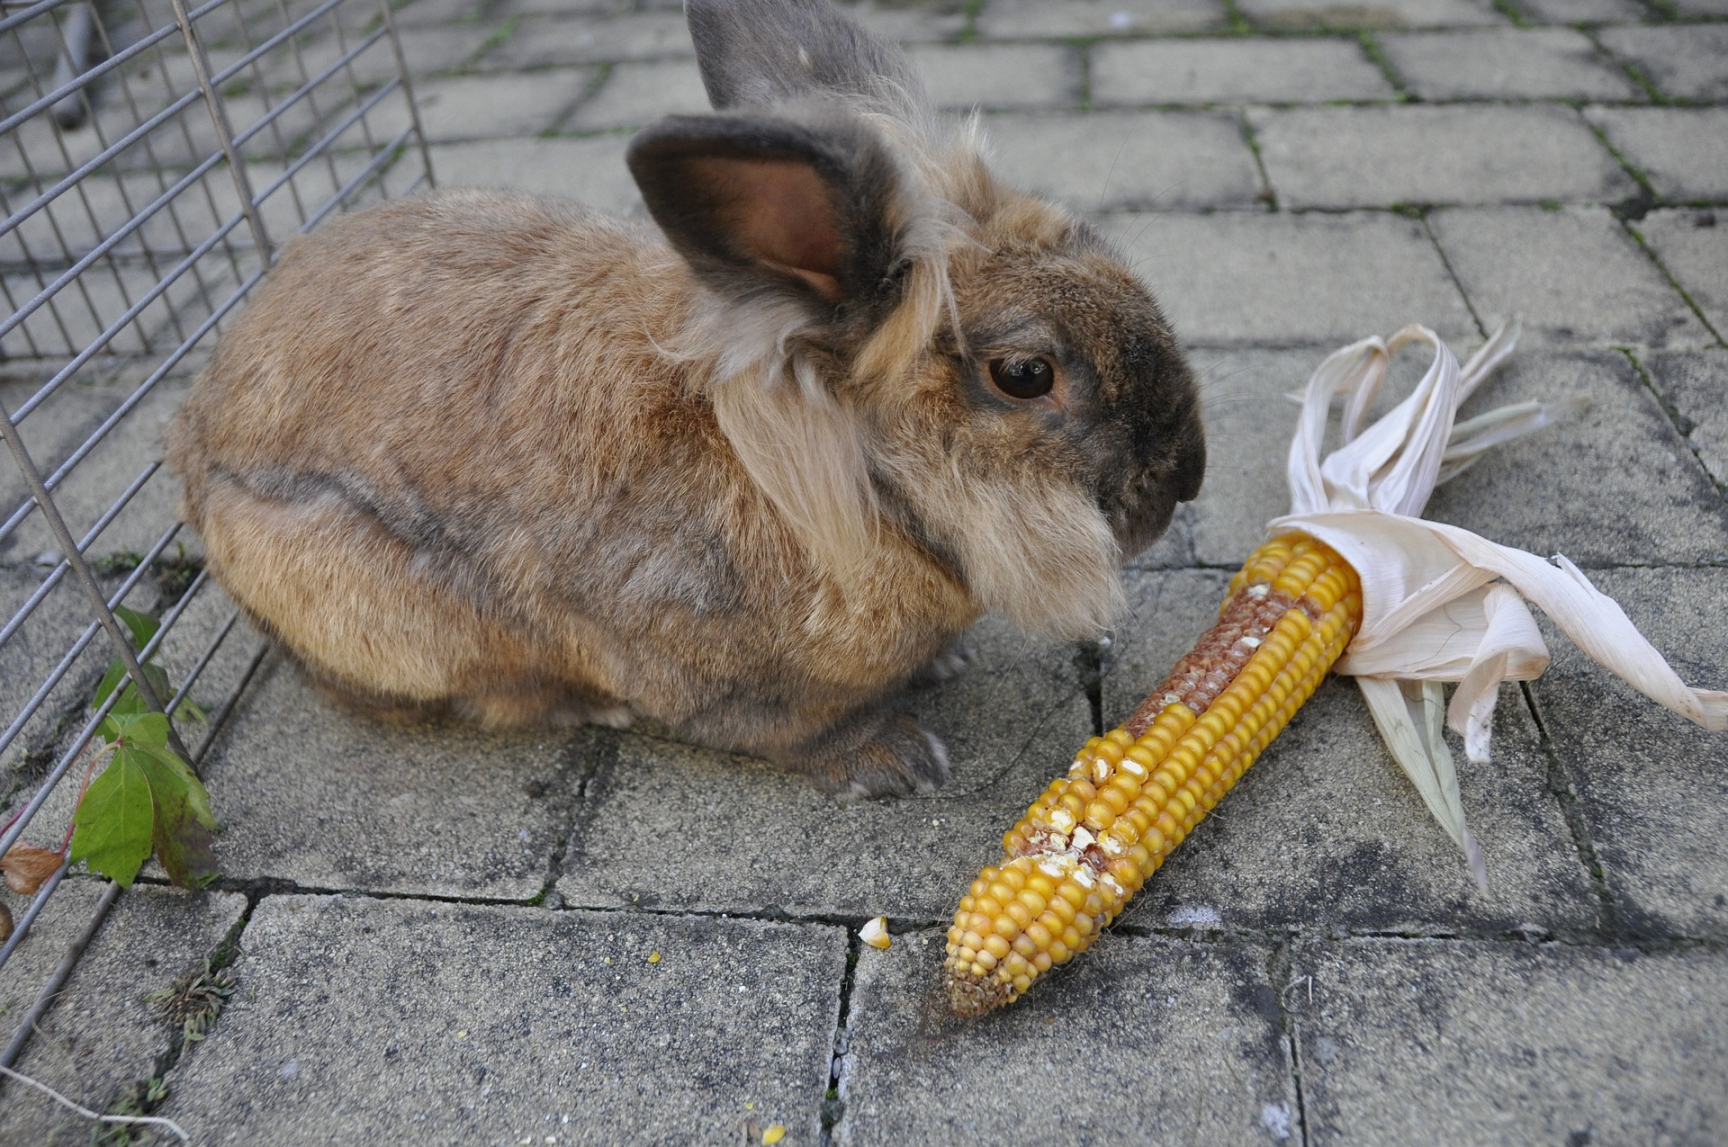 Can Rabbits Eat Corn or Is It Dangerous? - The Bunny Hub